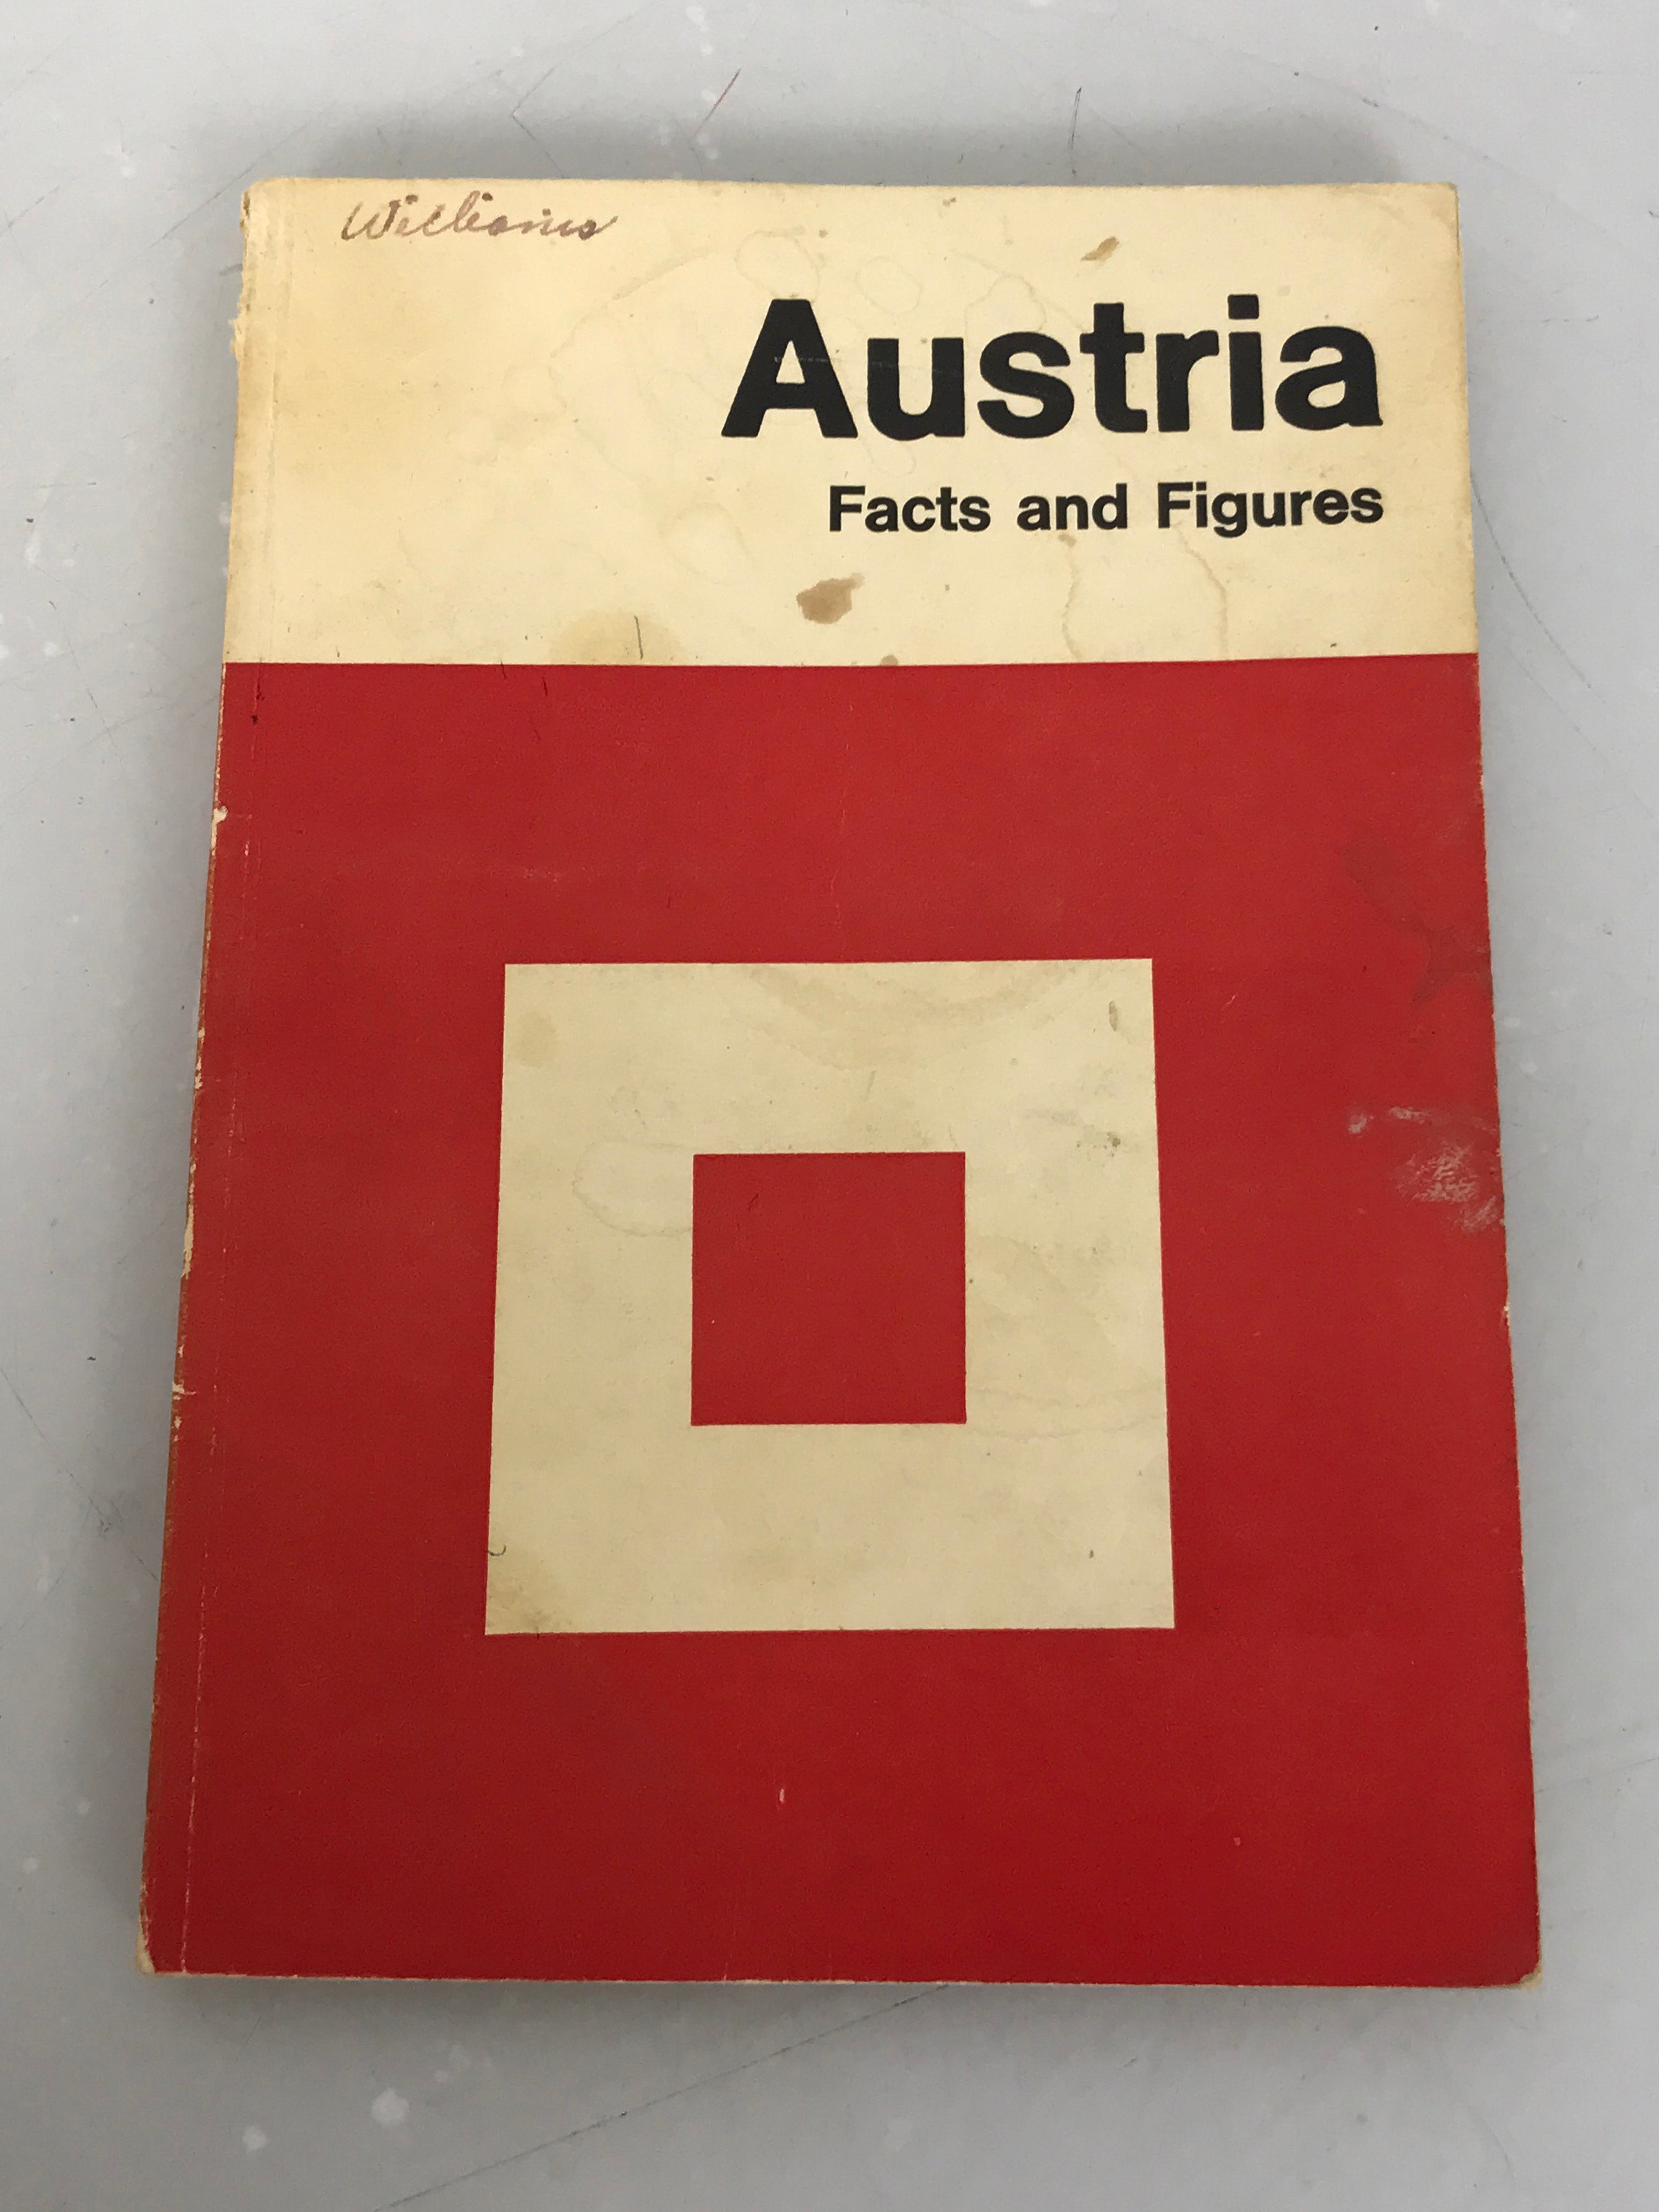 Austria Facts and Figures from the Federal Press Service in Vienna 1961 SC